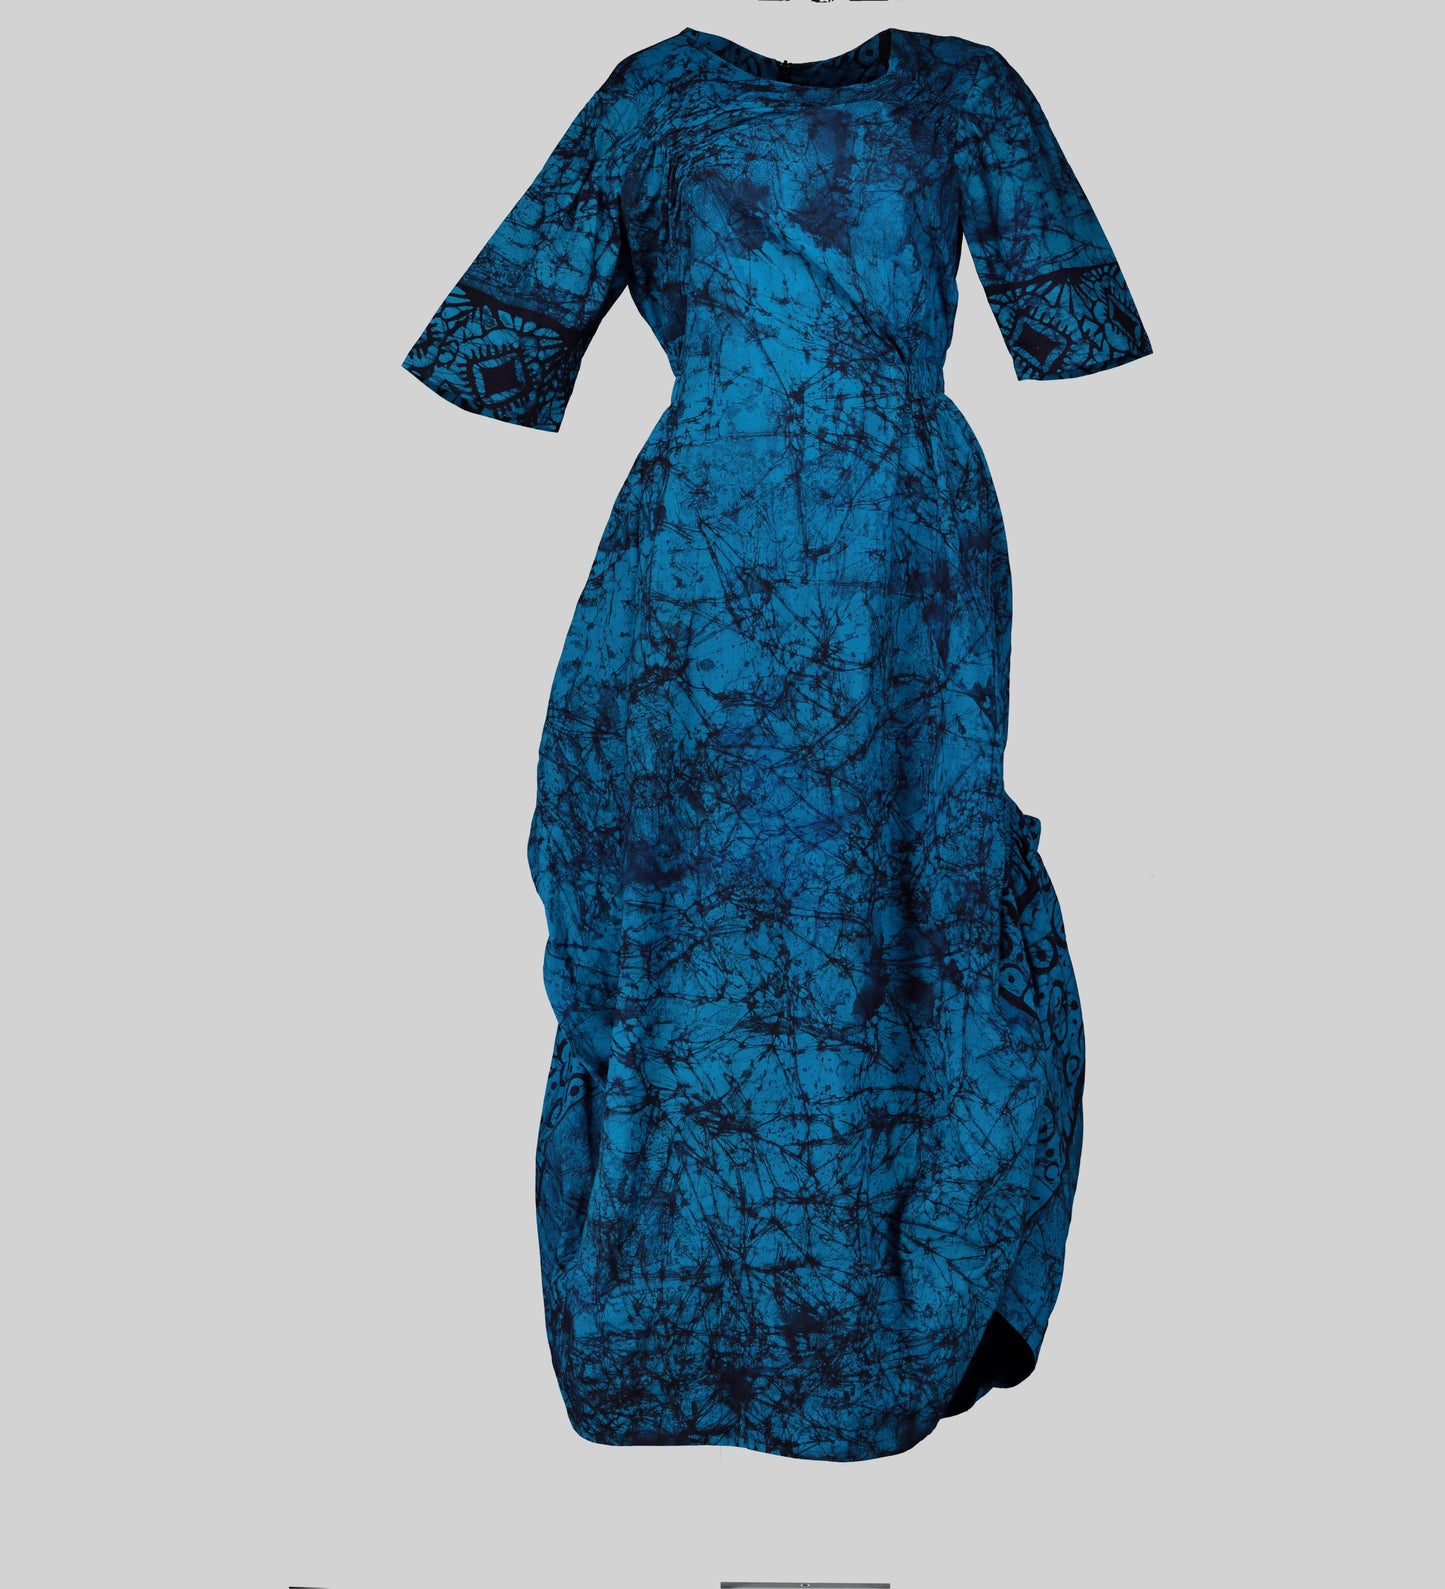 A long African wax print maxi dress with a vibrant blue colorway and intricate geometric patterns. The dress features a flattering ruched bodice and a comfortable round neckline.